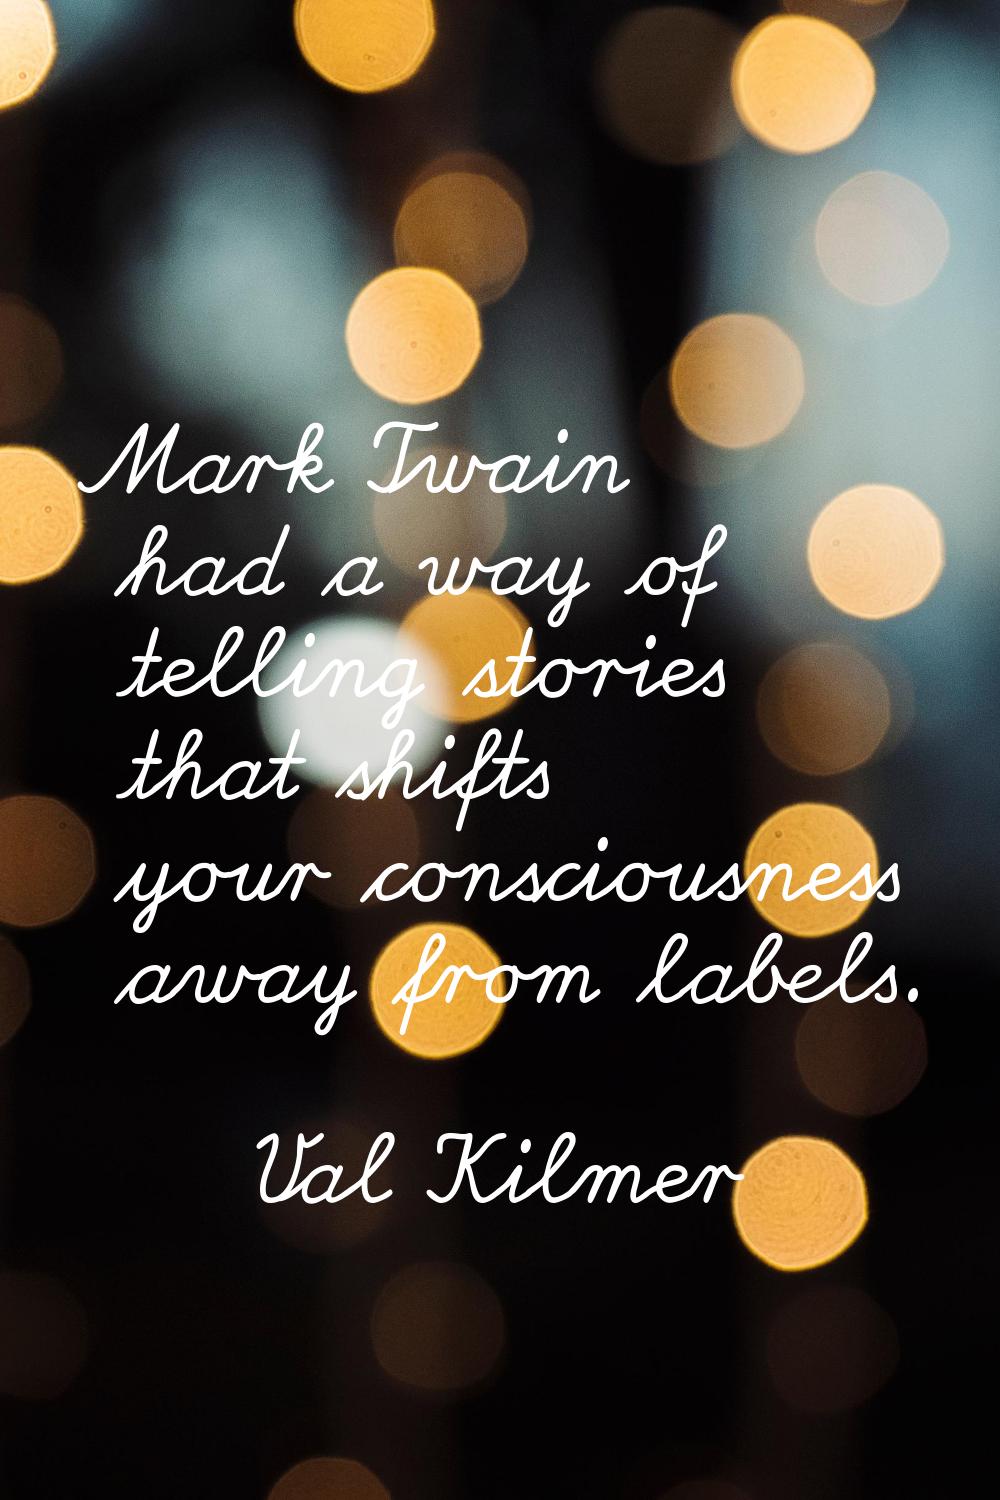 Mark Twain had a way of telling stories that shifts your consciousness away from labels.